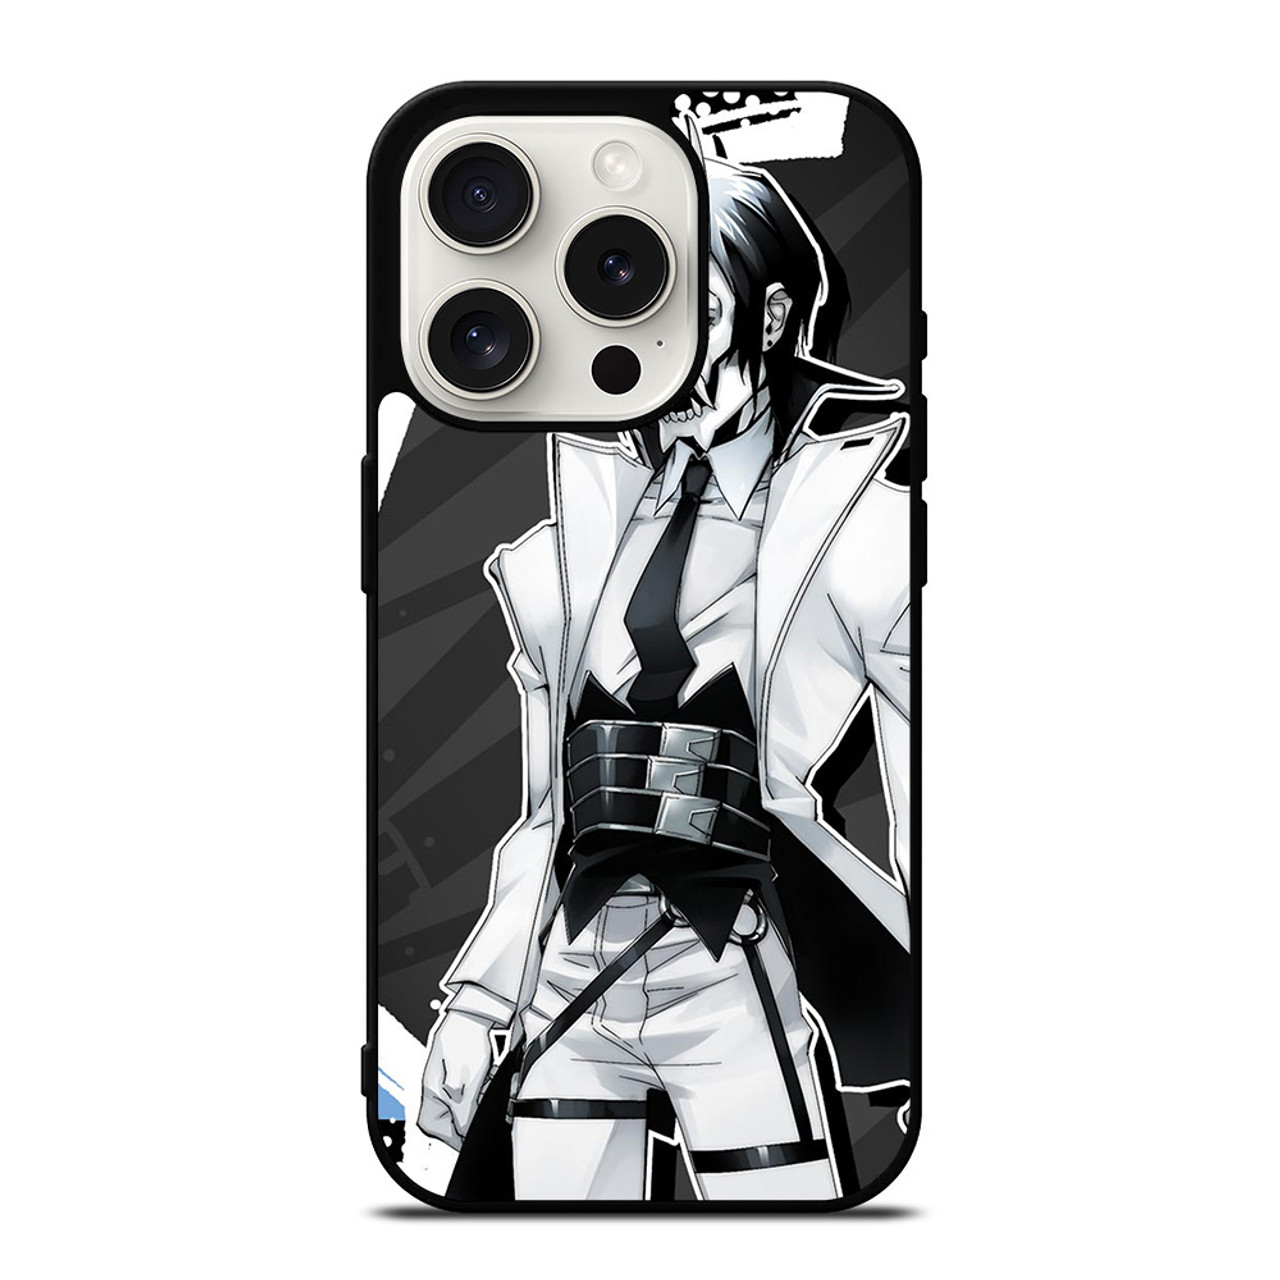 NEON WHITE GAMES CHARACTERS iPhone 7 / 8 Case Cover